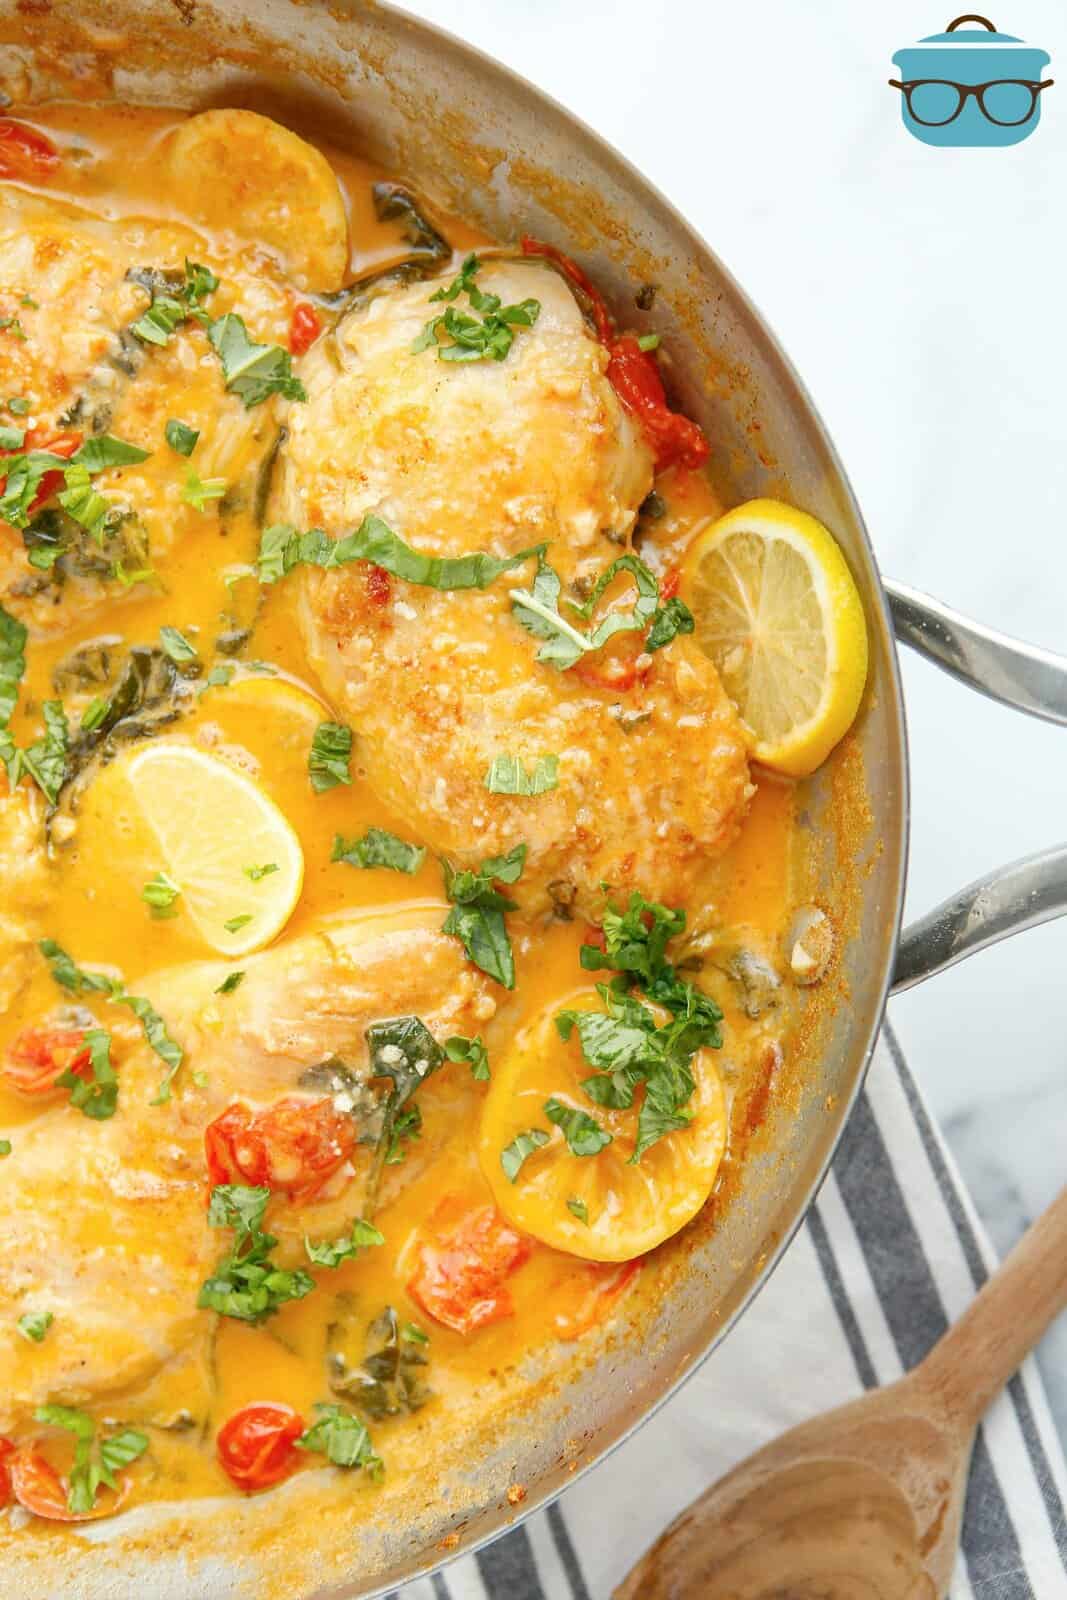 Overhead of Creamy Lemon Chicken Skillet in pan showing lemons and garnishes.